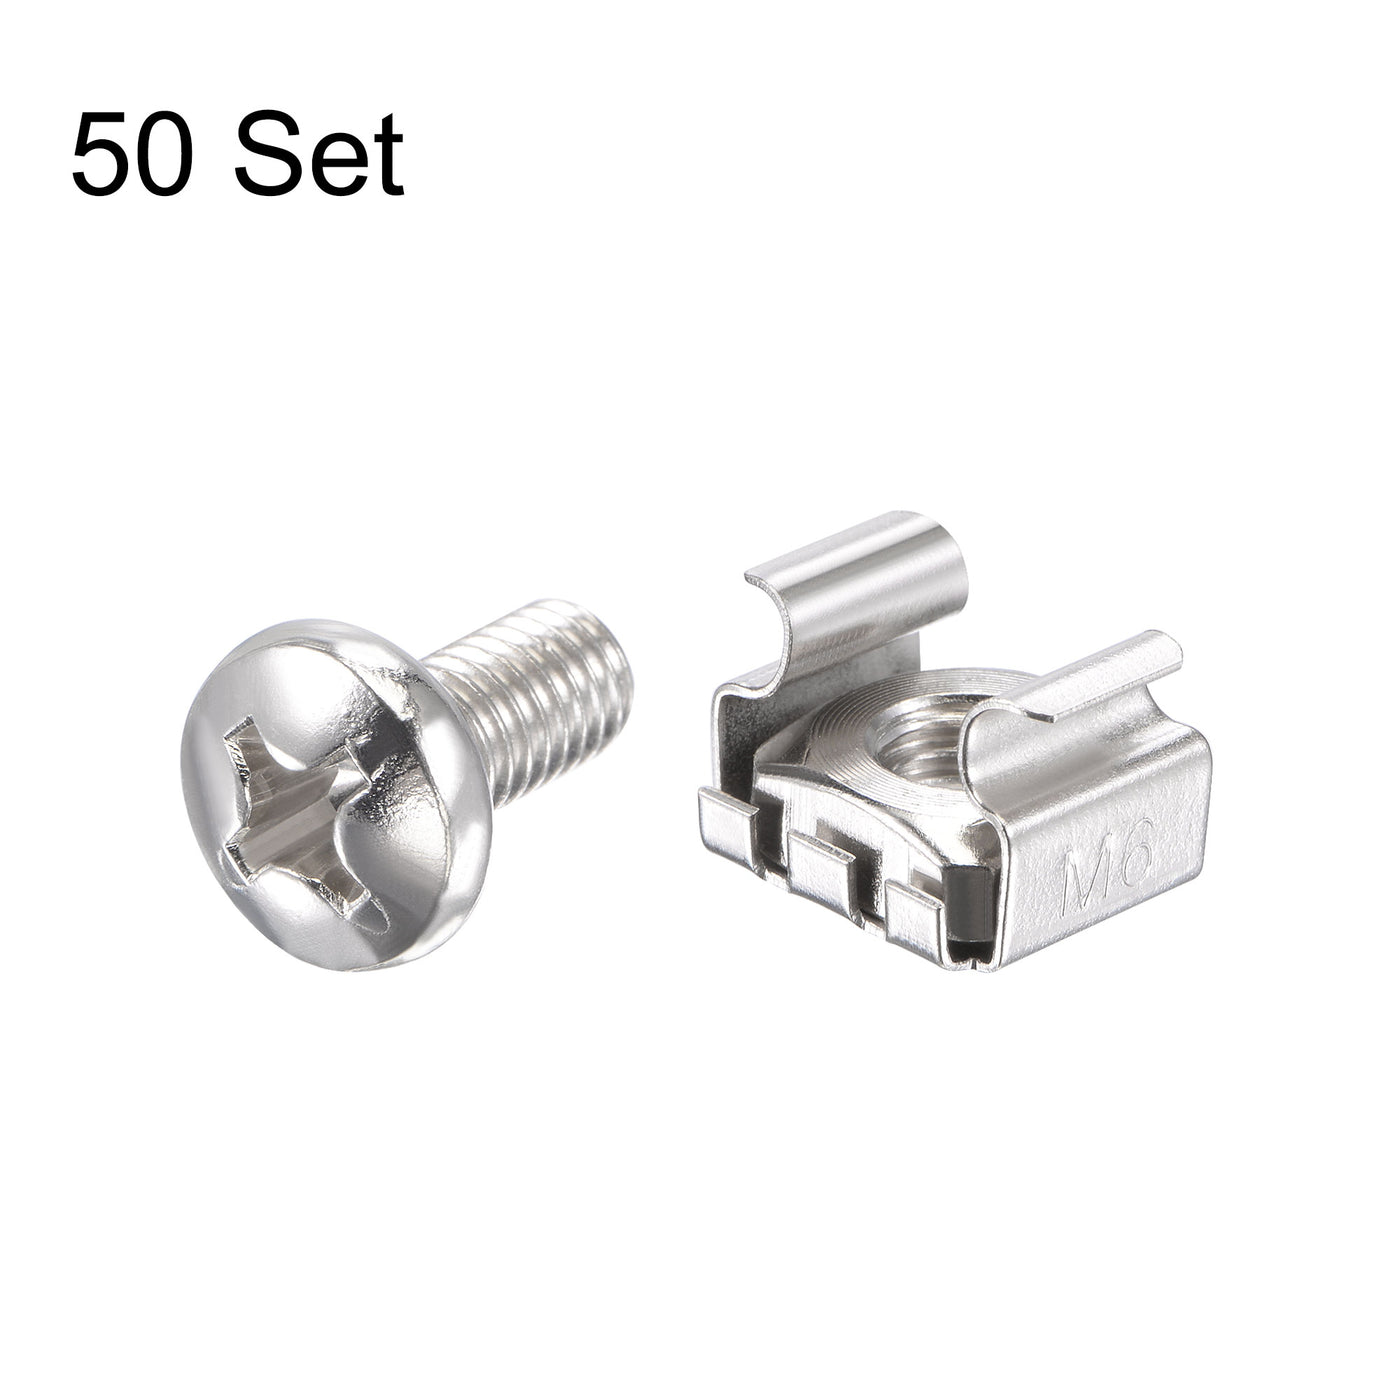 uxcell Uxcell Rack Screws, M6x12mm Screws and Cage Nuts 50Set for Server Shelf Rack